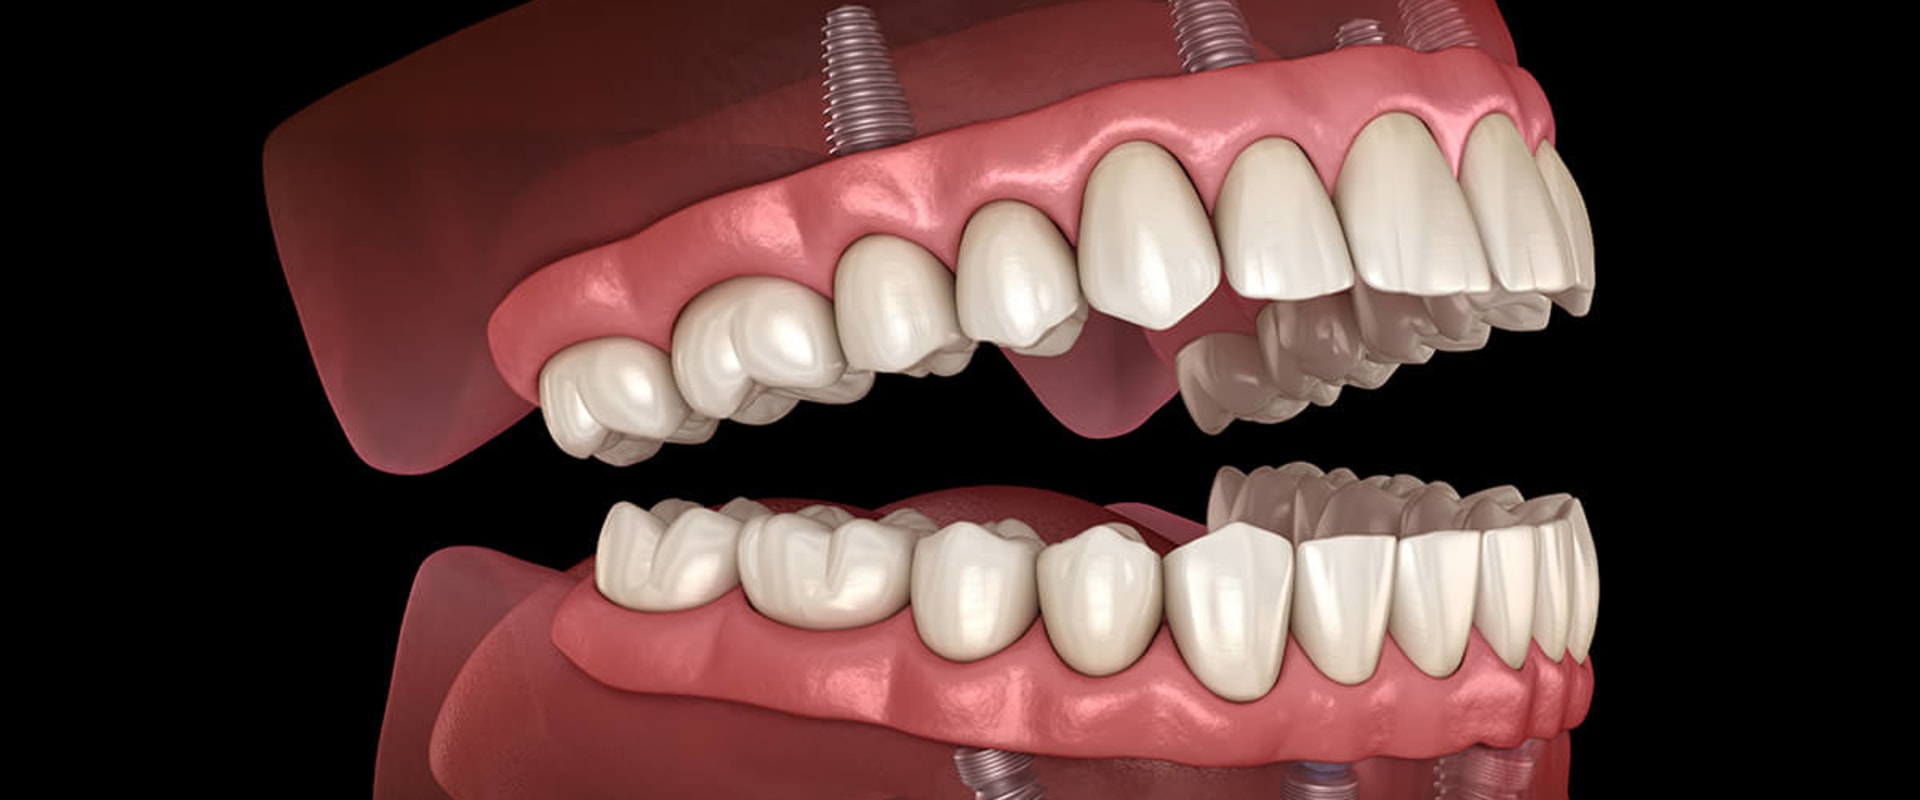 The Cost of Implant Supported Dentures in the US: What You Need to Know